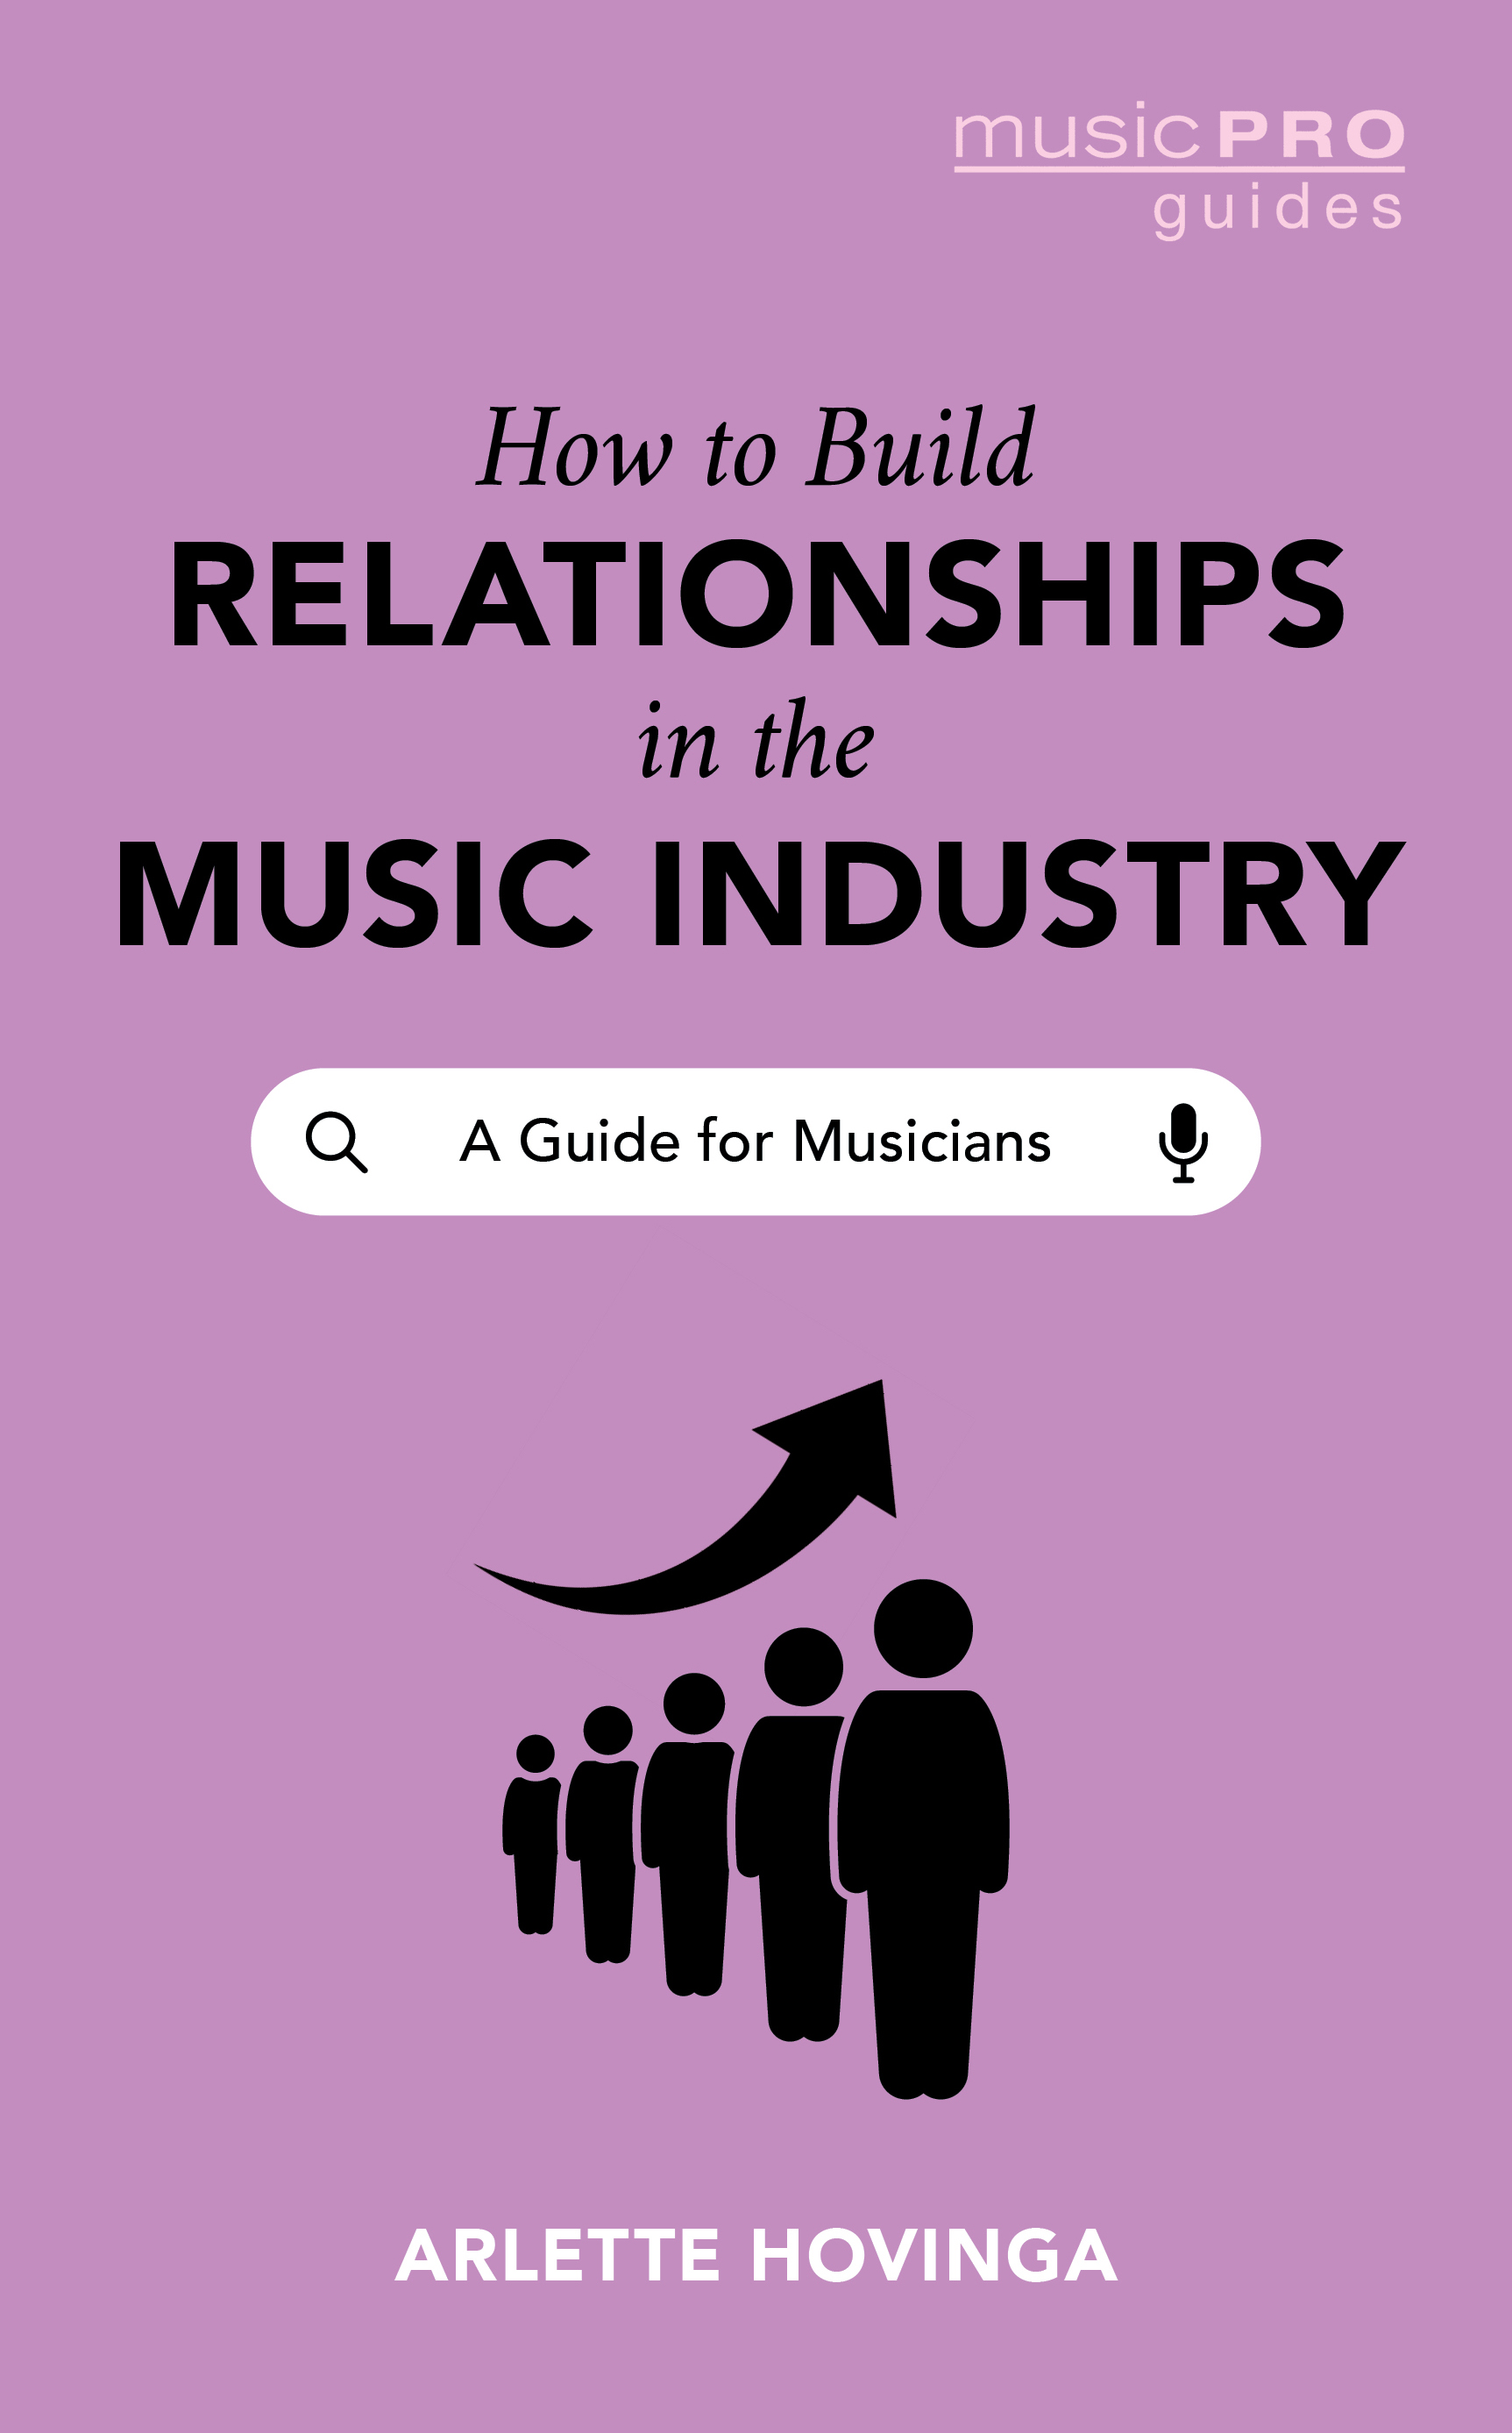 How To Build Relationships in the Music Industry: A Guide for Musicians